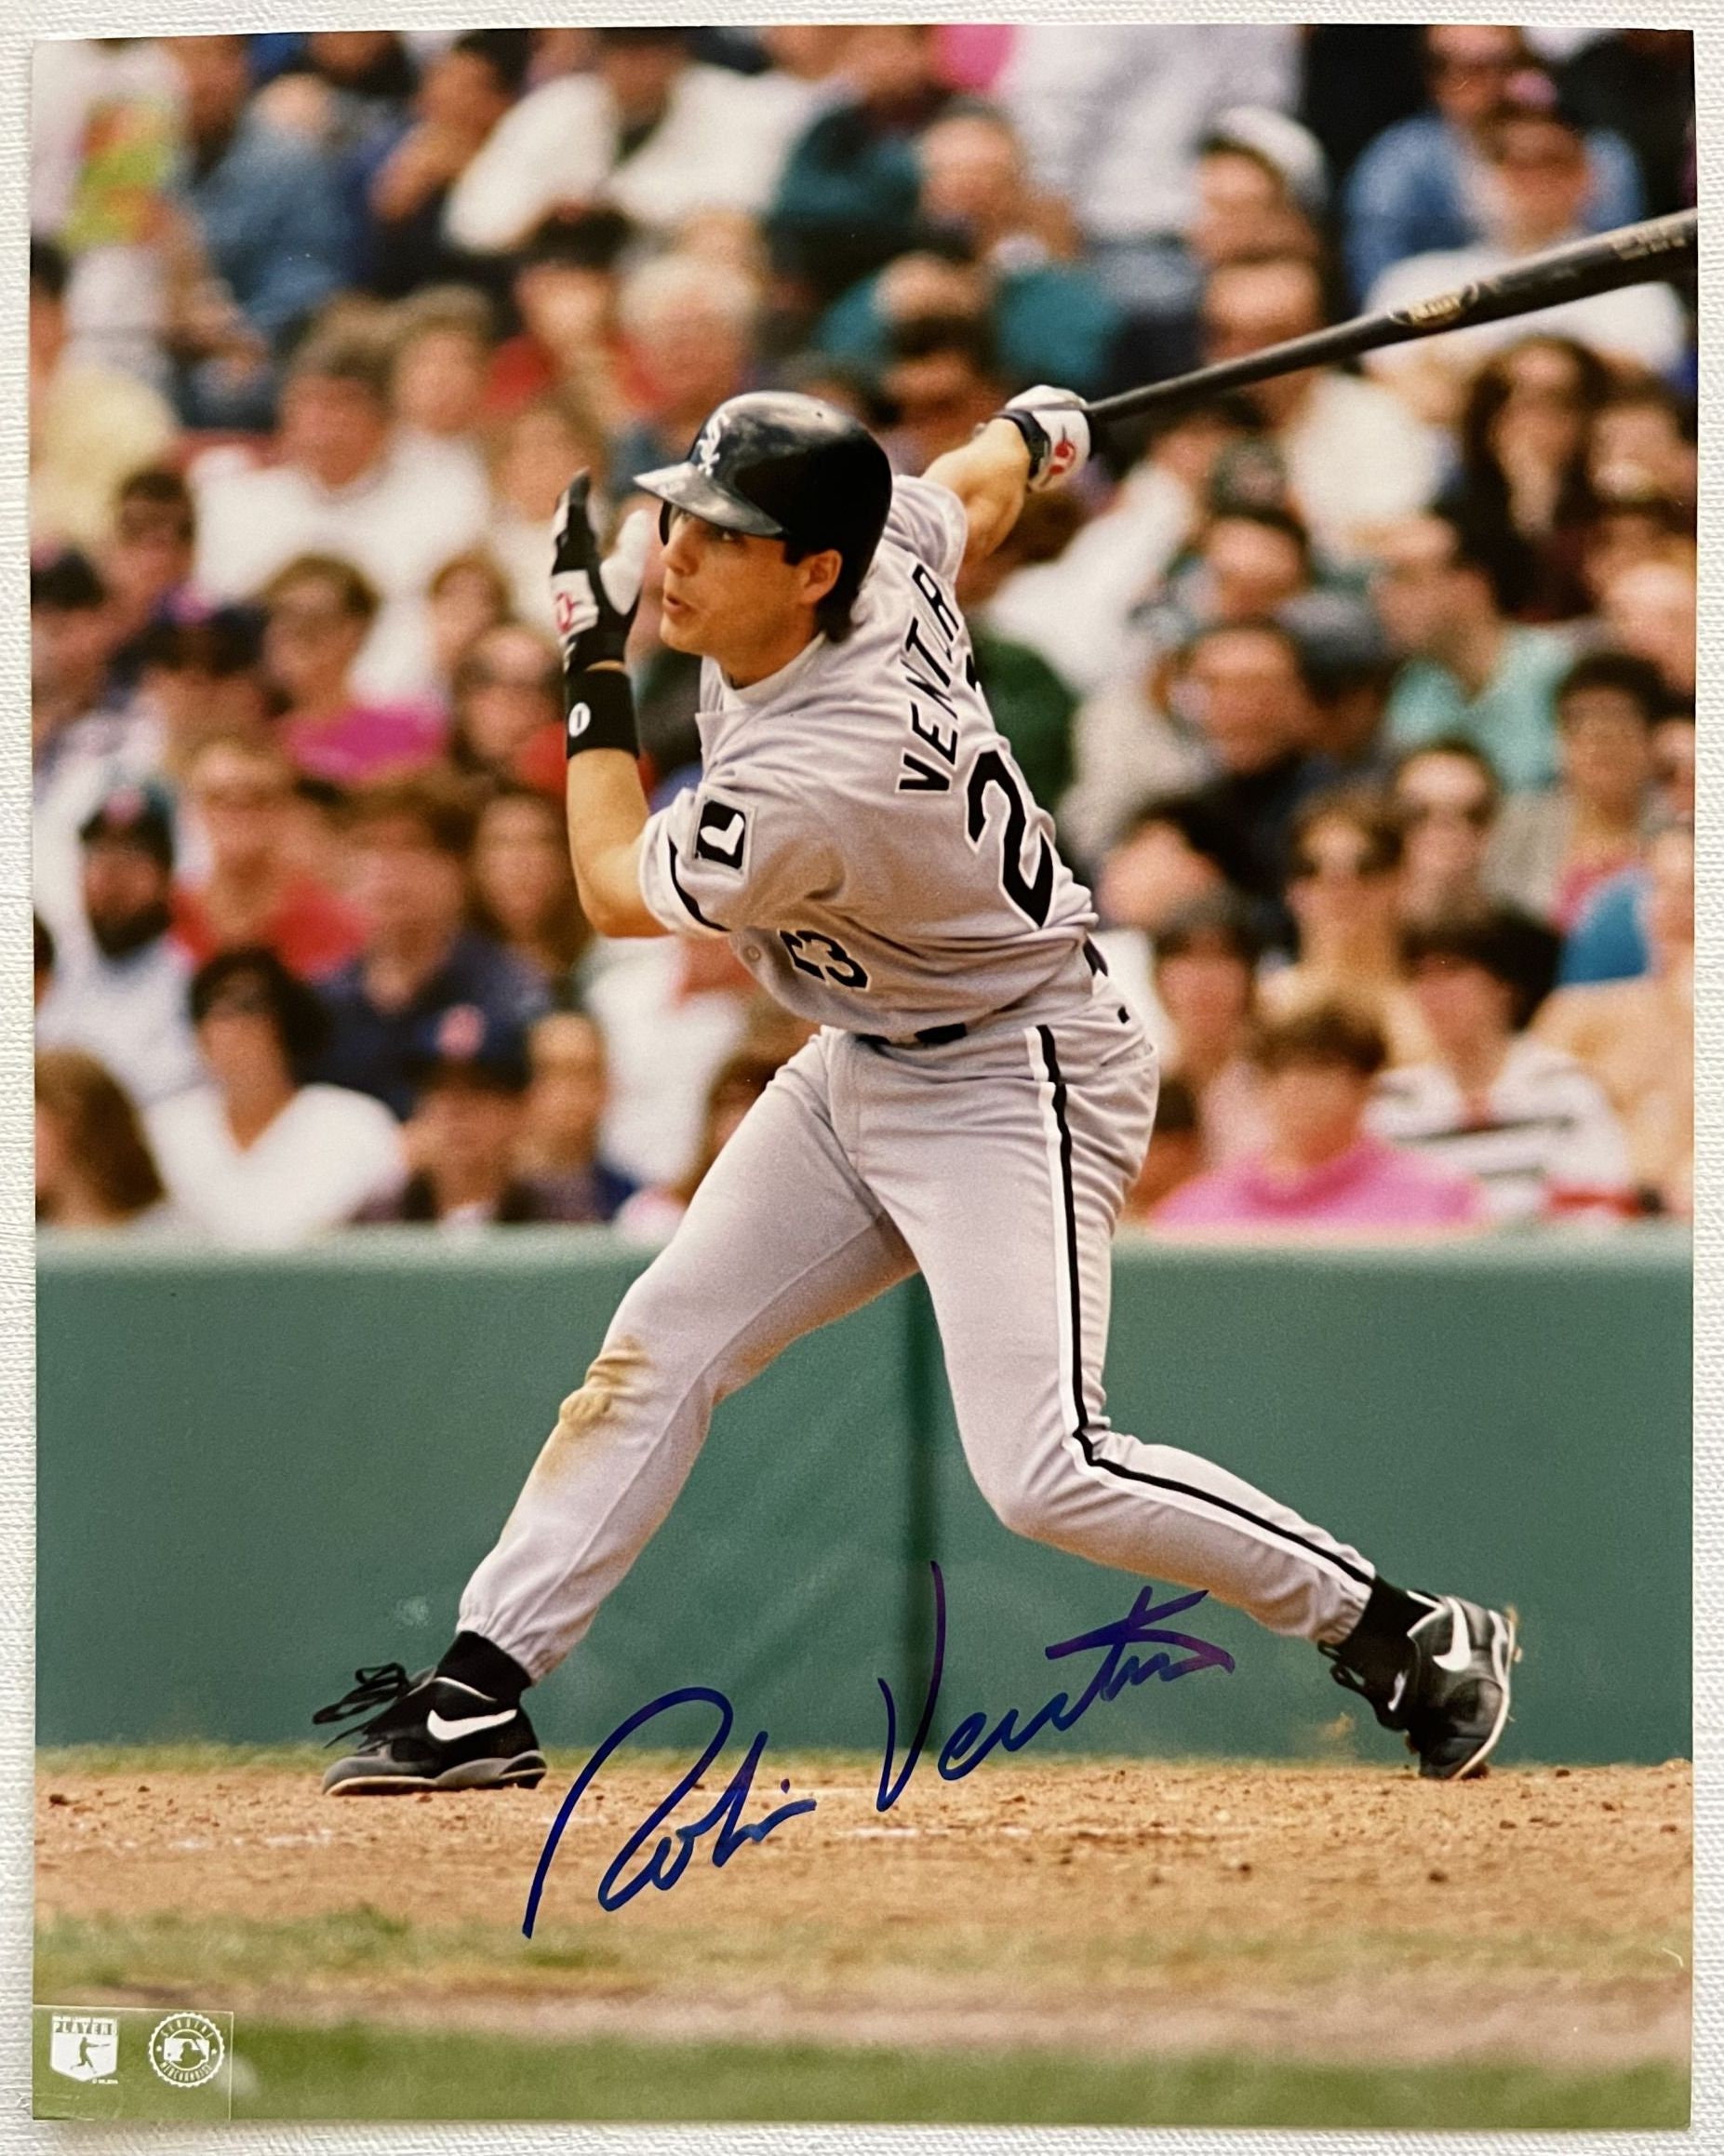 Robin Ventura Signed Autographed Glossy 8x10 Photo Chicago 